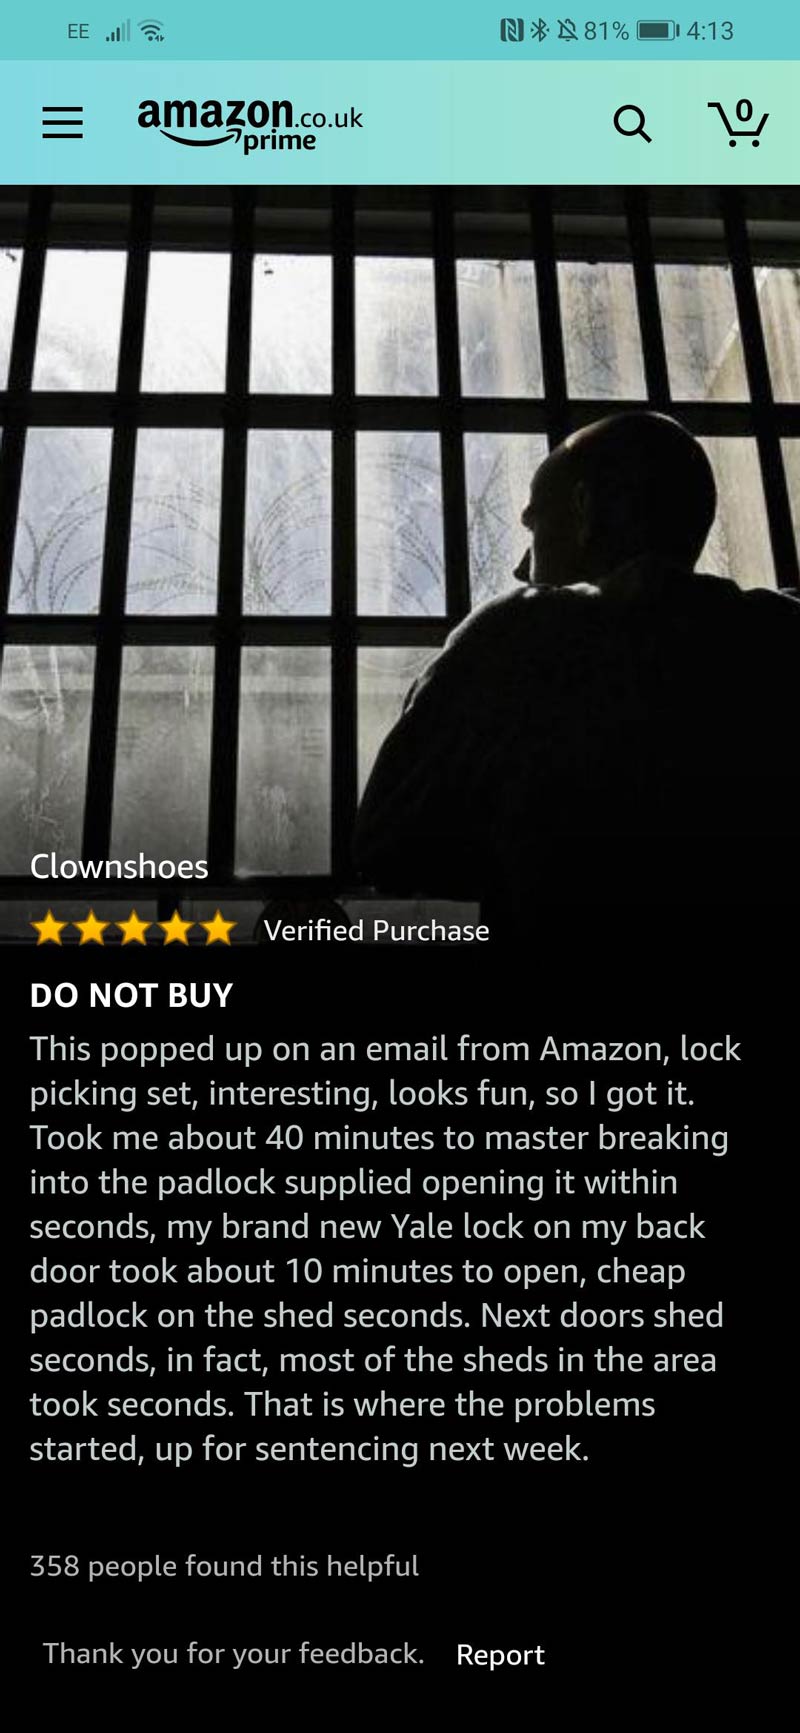 Found this review on amazon for a lock pick